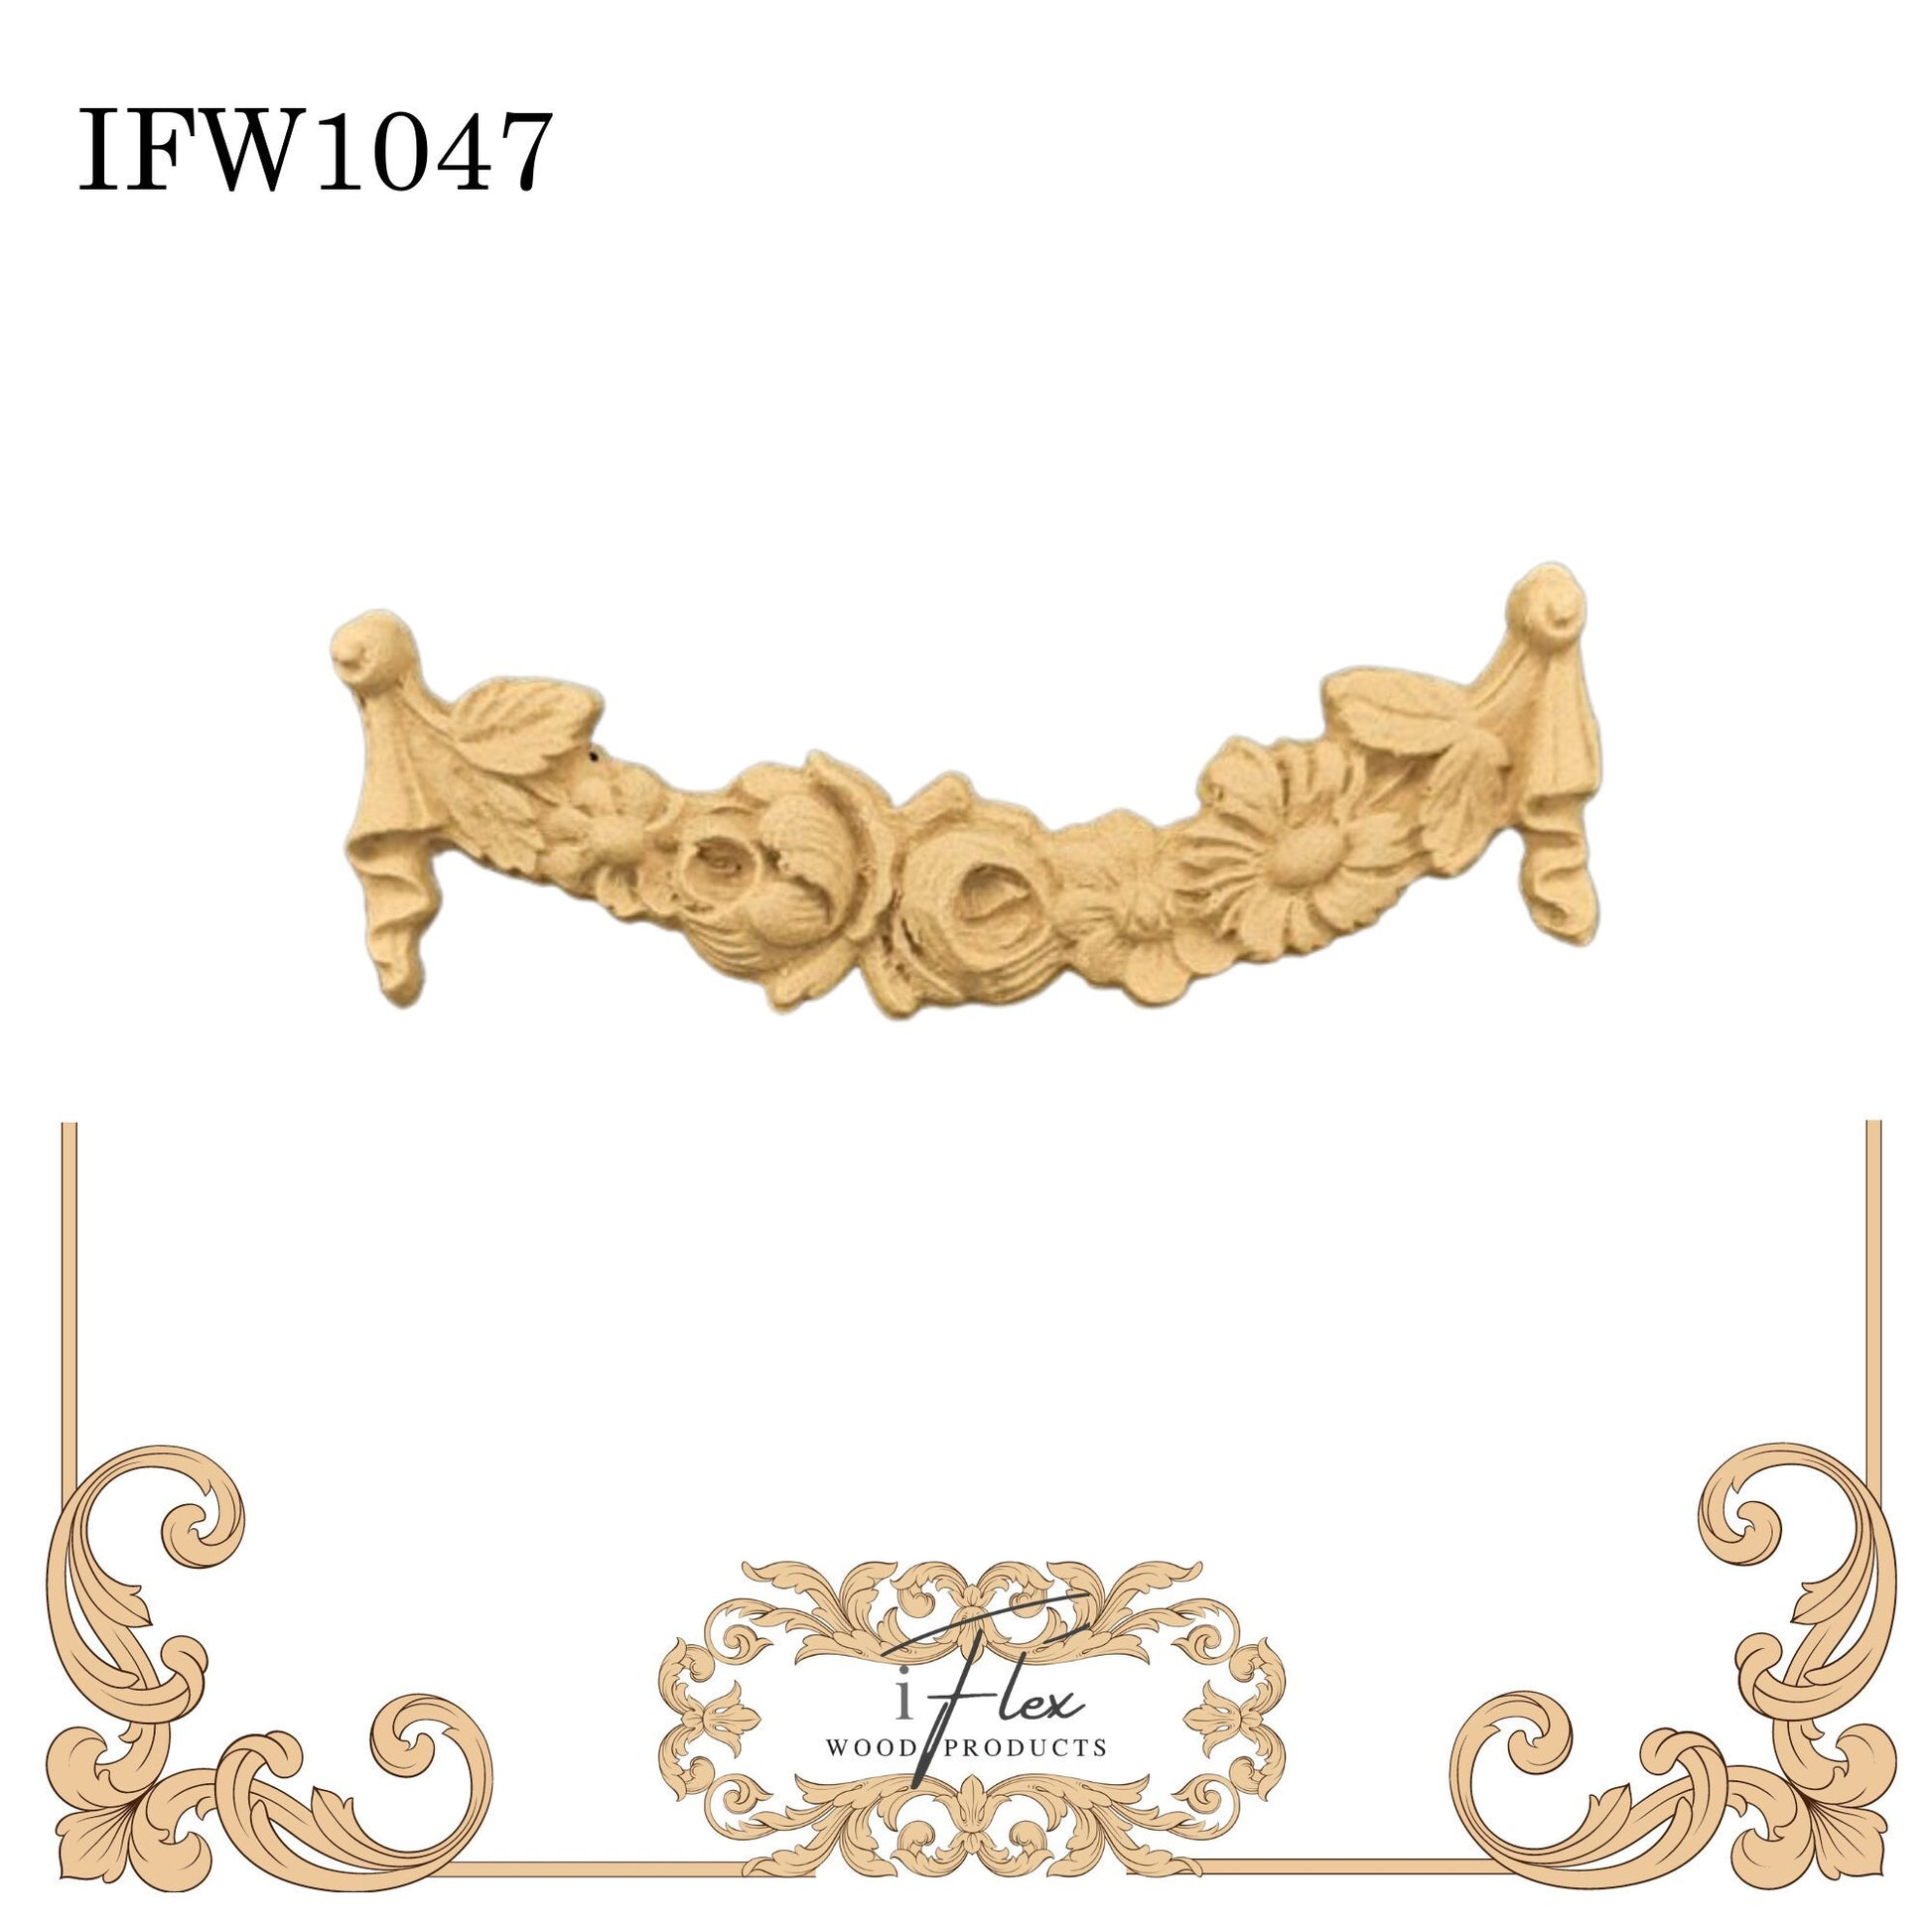 IFW 1047 iFlex Wood Products, bendable mouldings, flexible, wooden appliques, flower garland